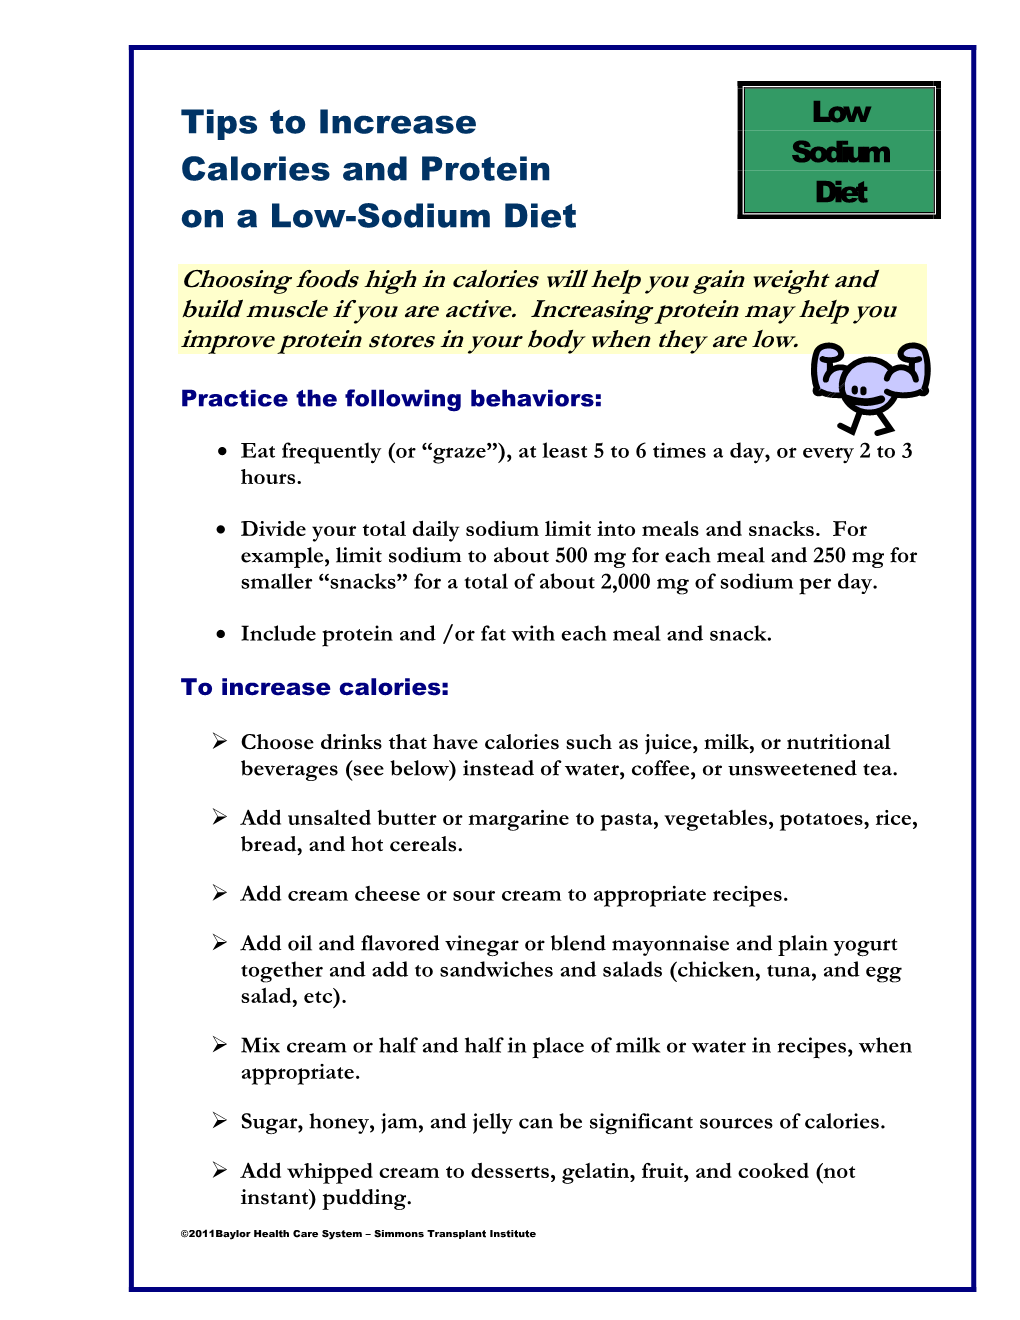 Tips to Increase Calories and Protein on a Low-Sodium Diet